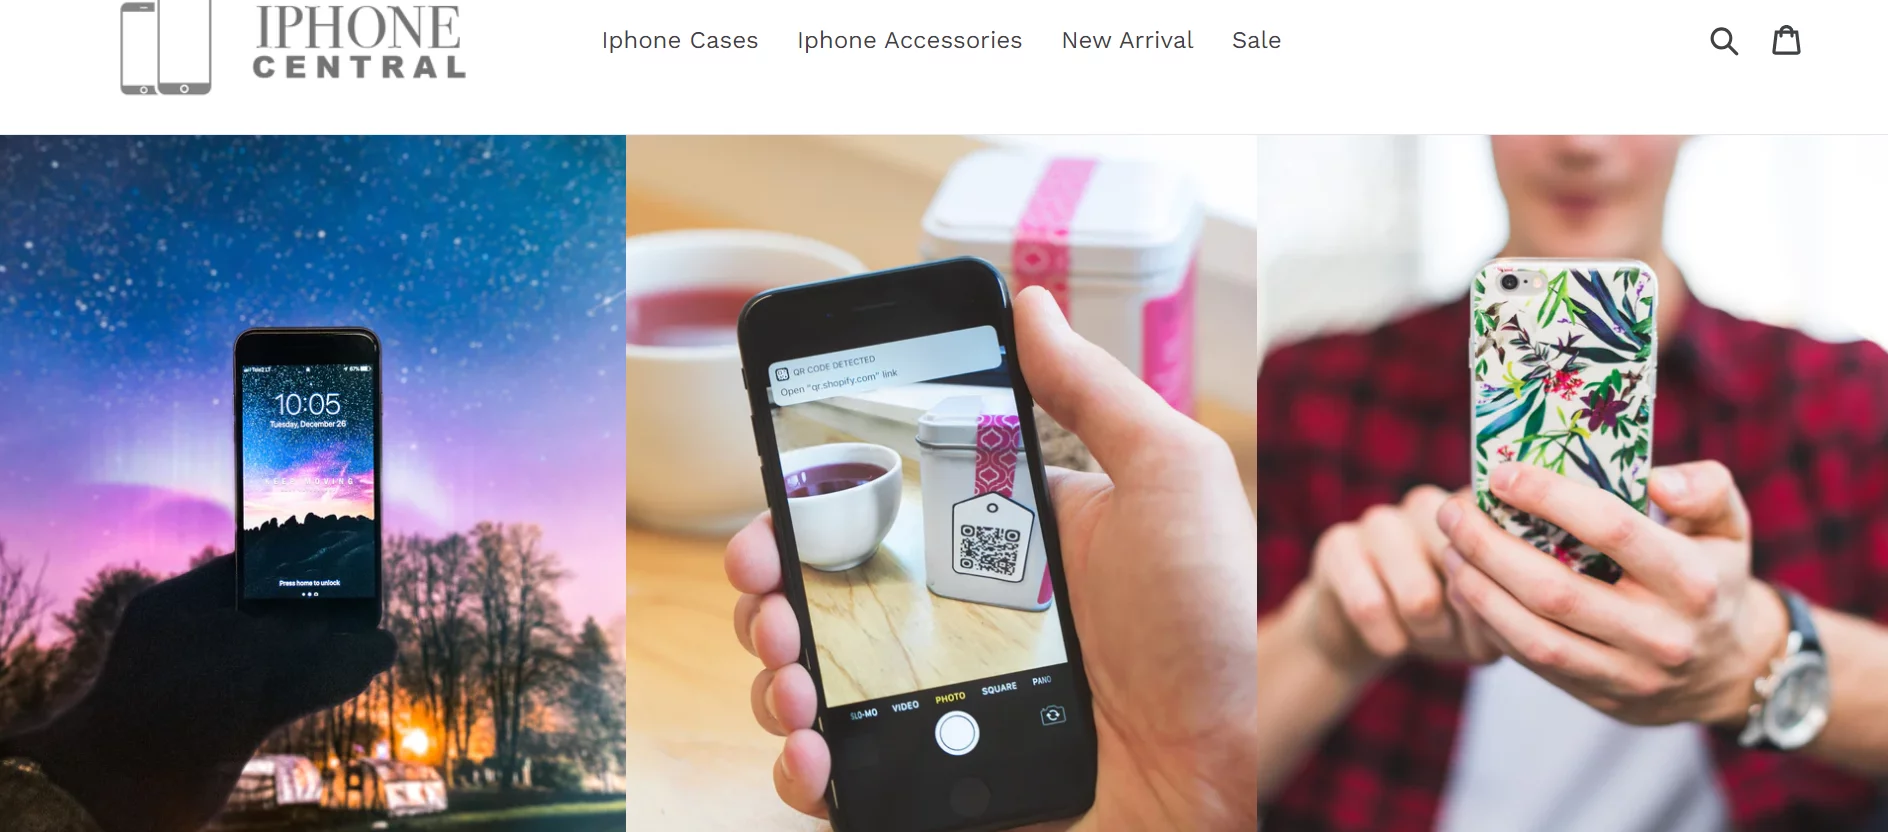 Where To Find Best Shopify iPhone Accessories Stores?